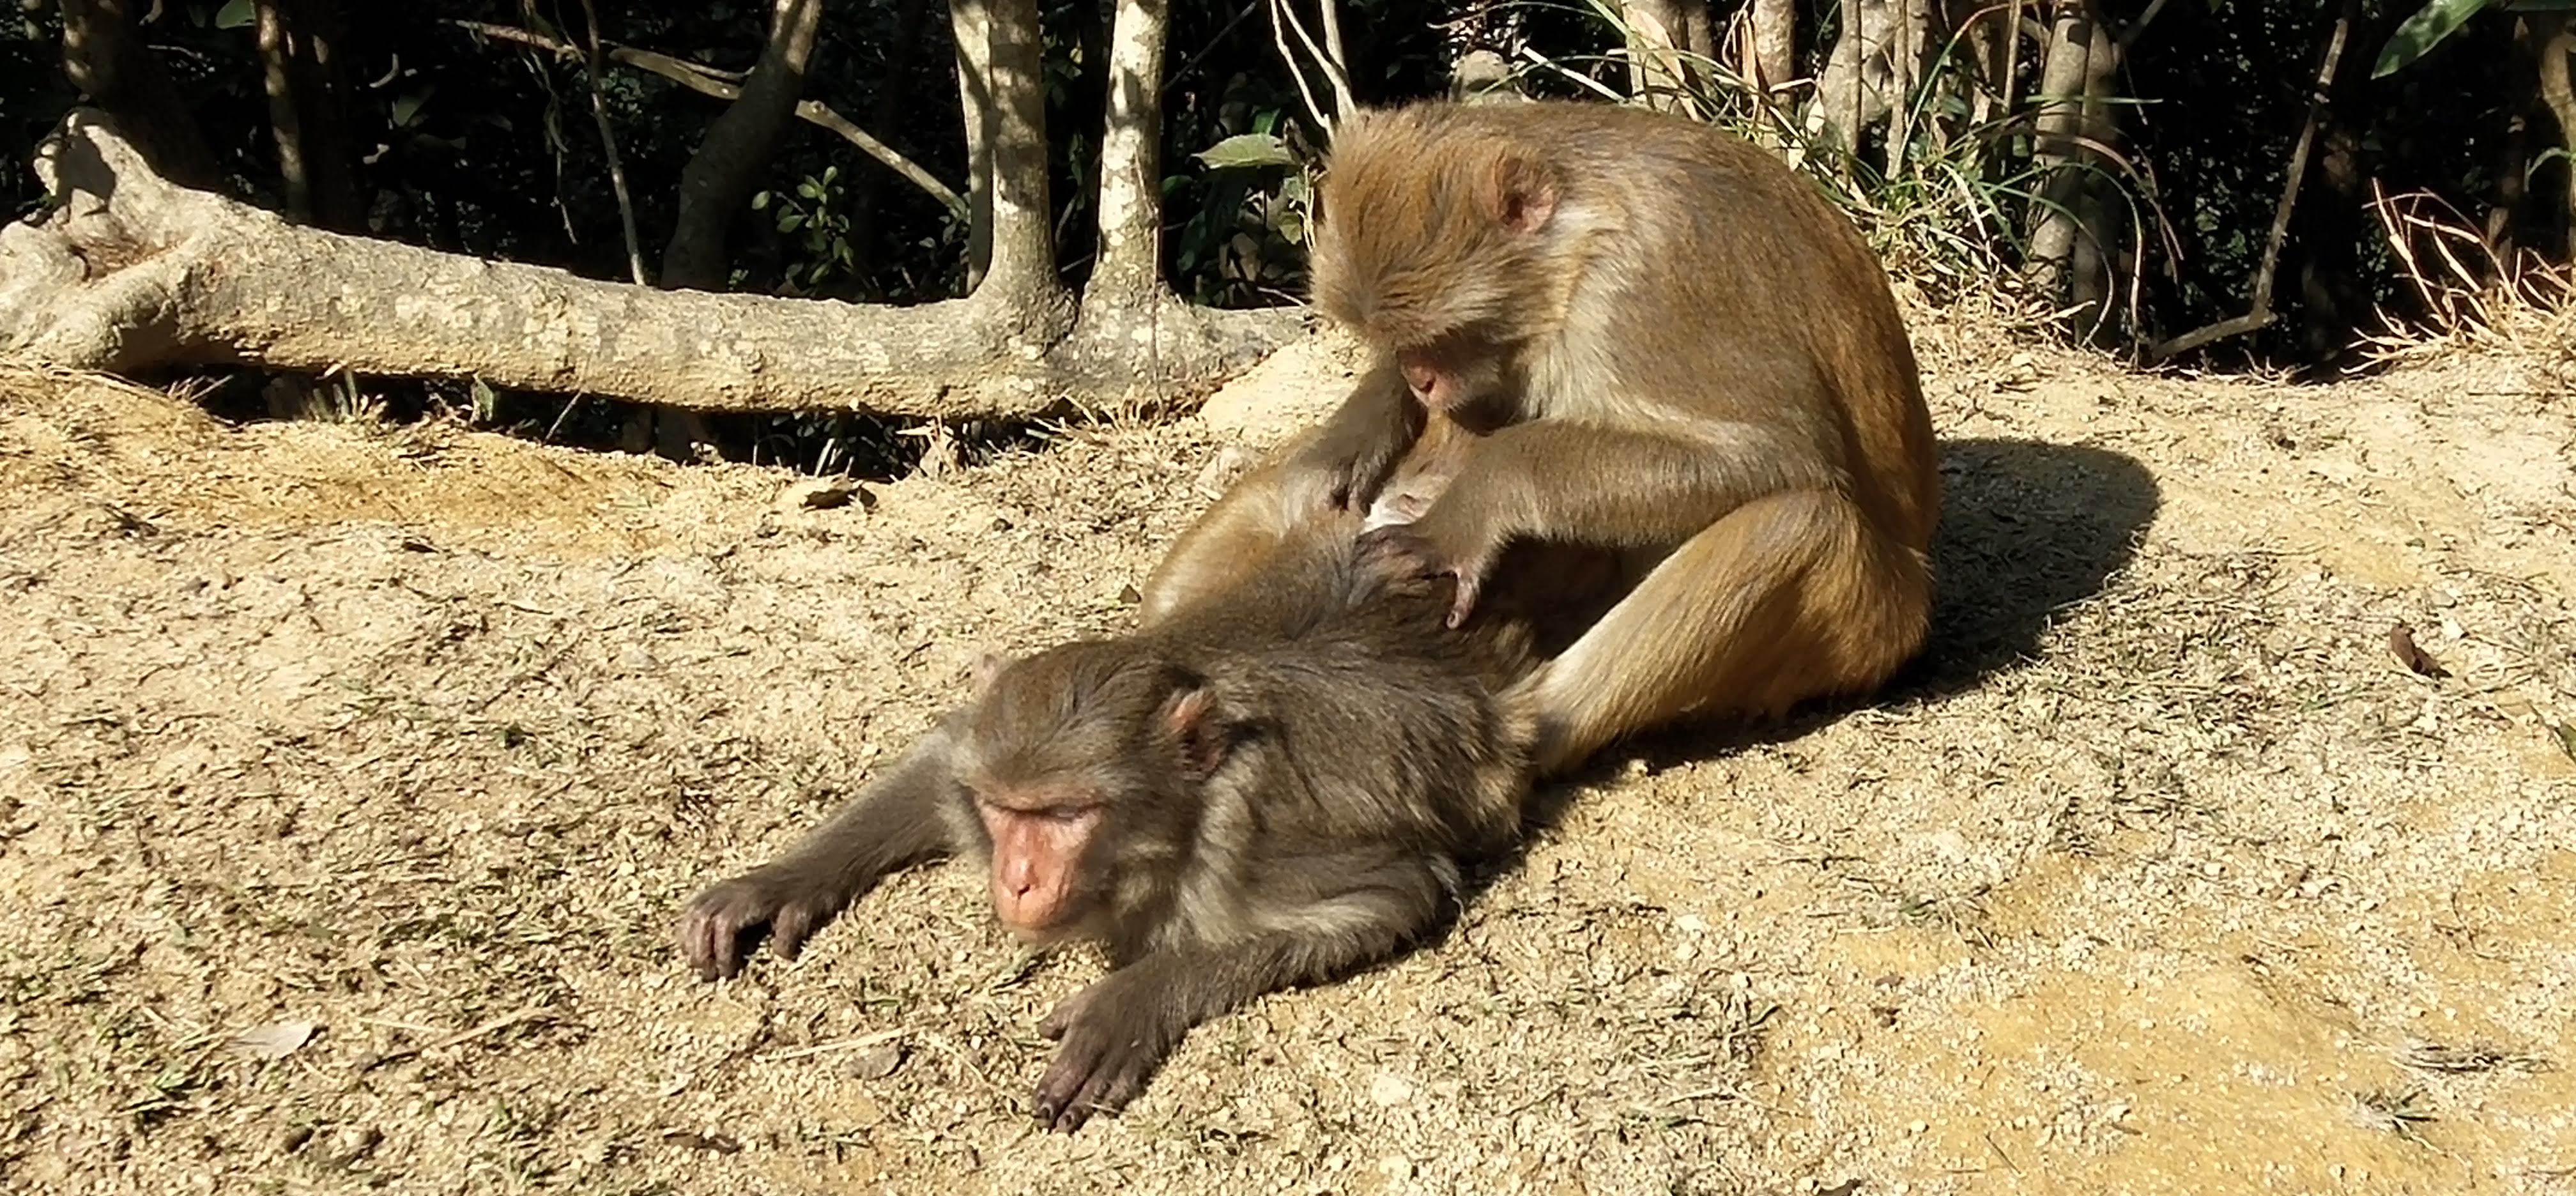 Learn clever monkeys' useful life wisdom at Kam Shan Country Park and Kowloon Reservoir